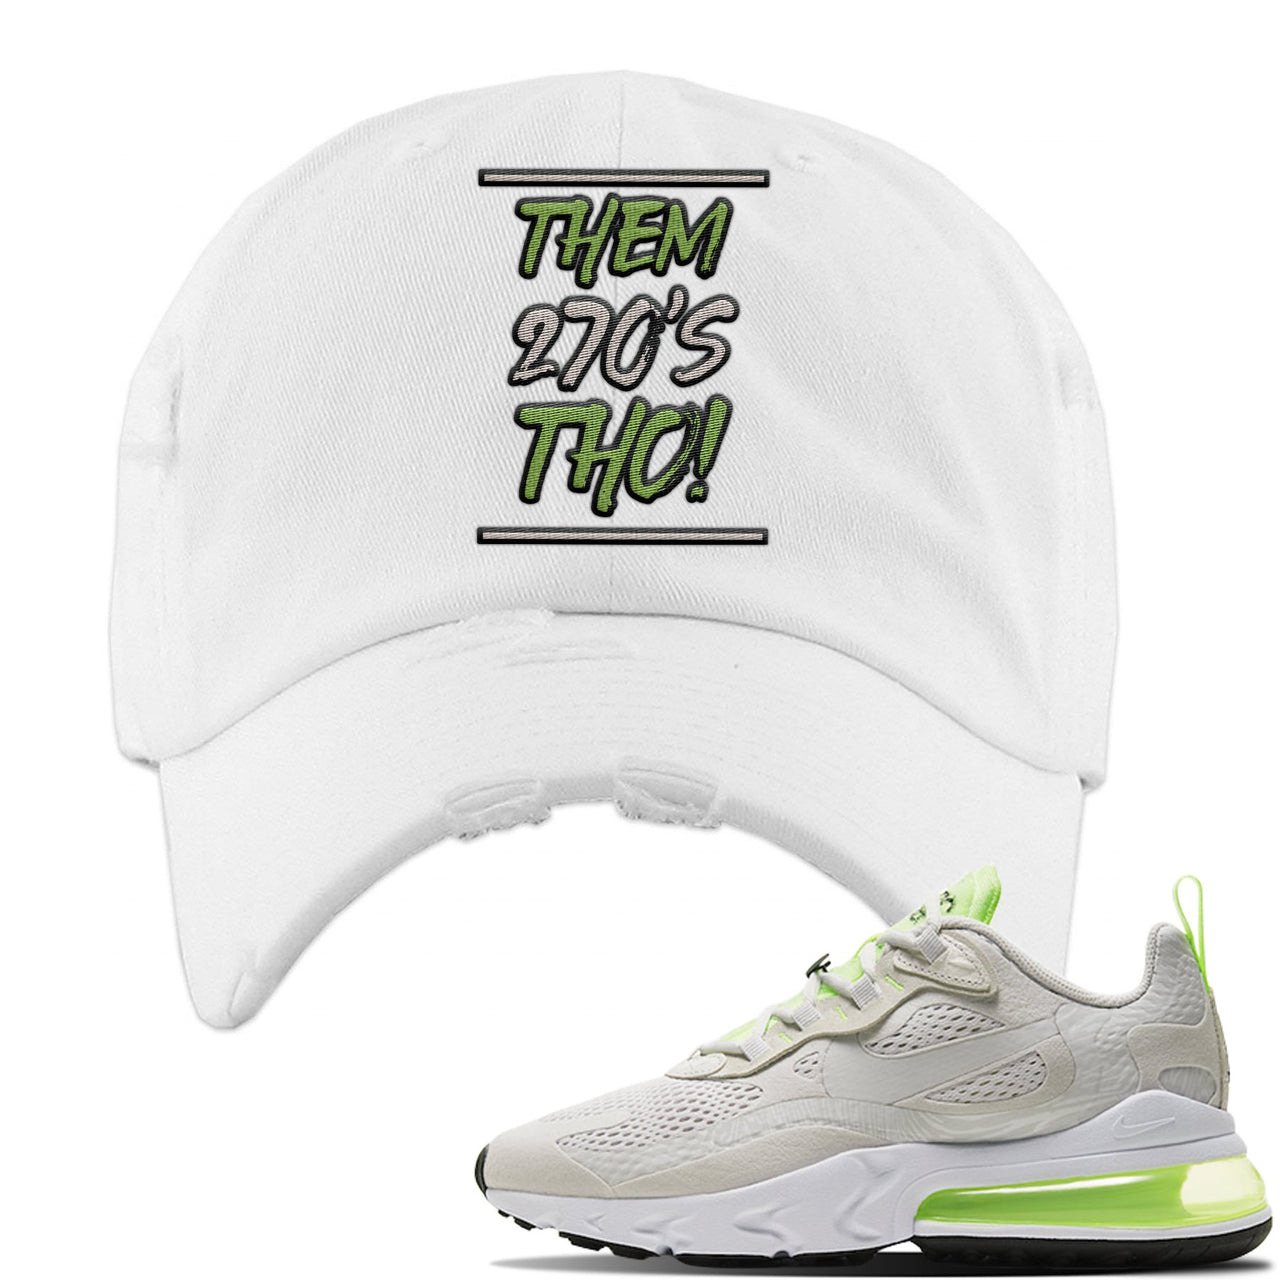 Ghost Green React 270s Distressed Dad Hat | Them 270's Tho, White